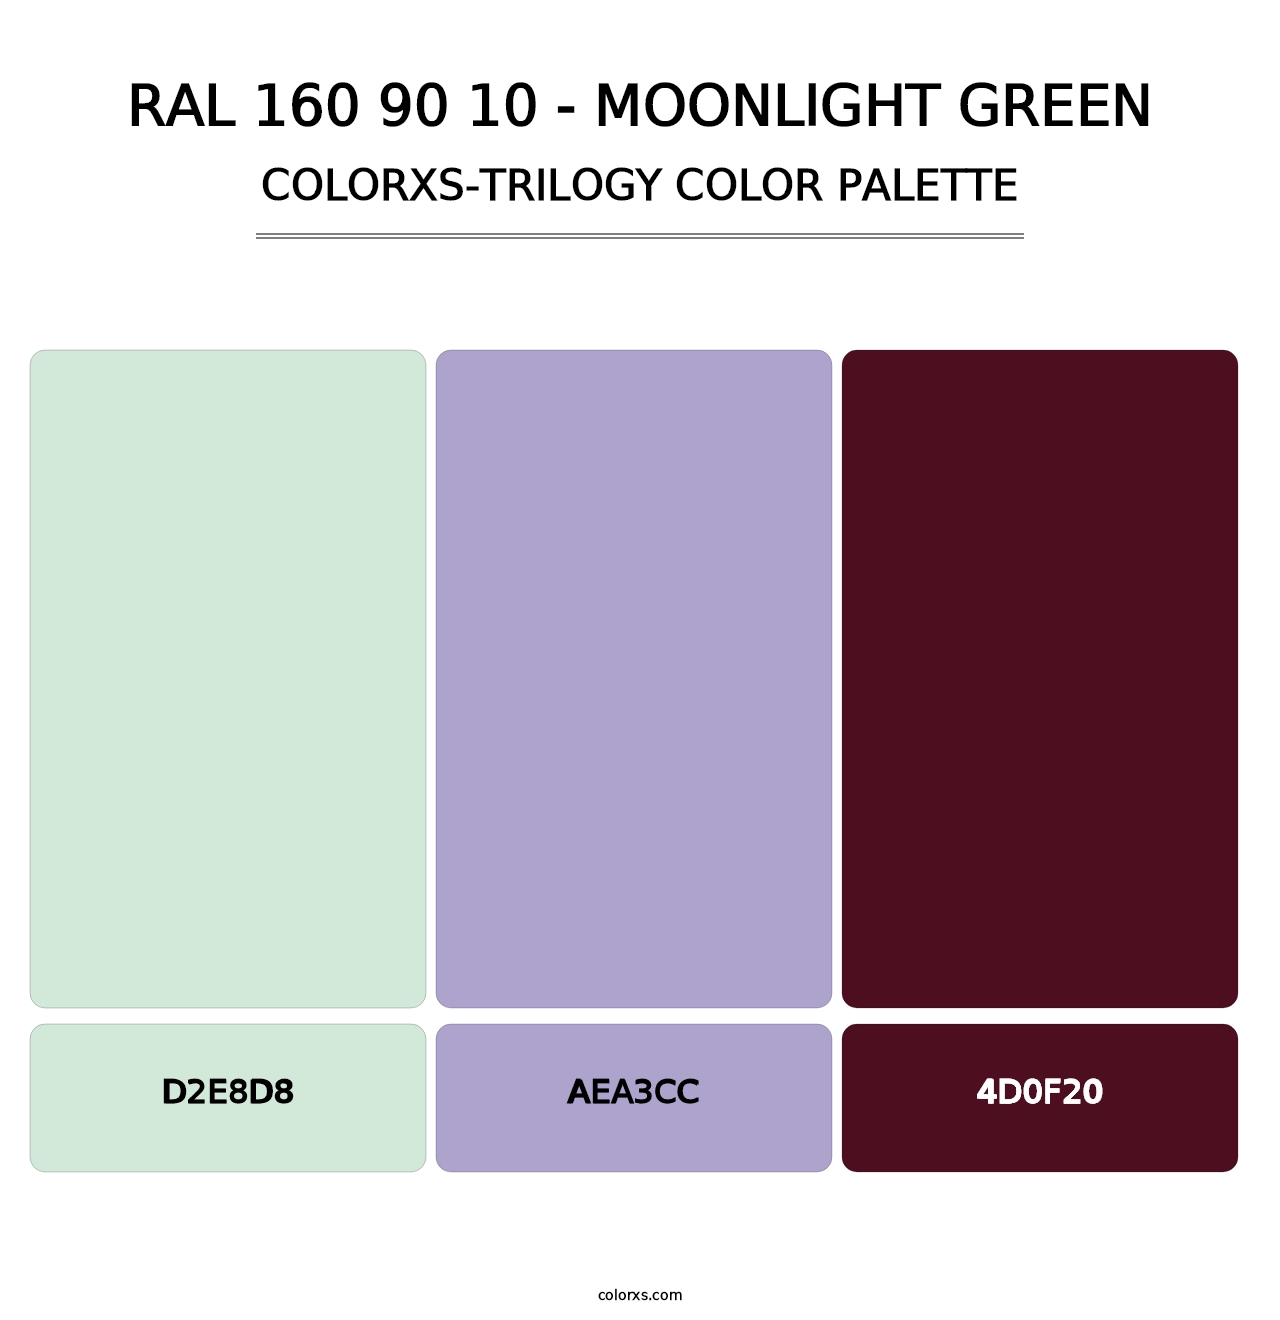 RAL 160 90 10 - Moonlight Green - Colorxs Trilogy Palette